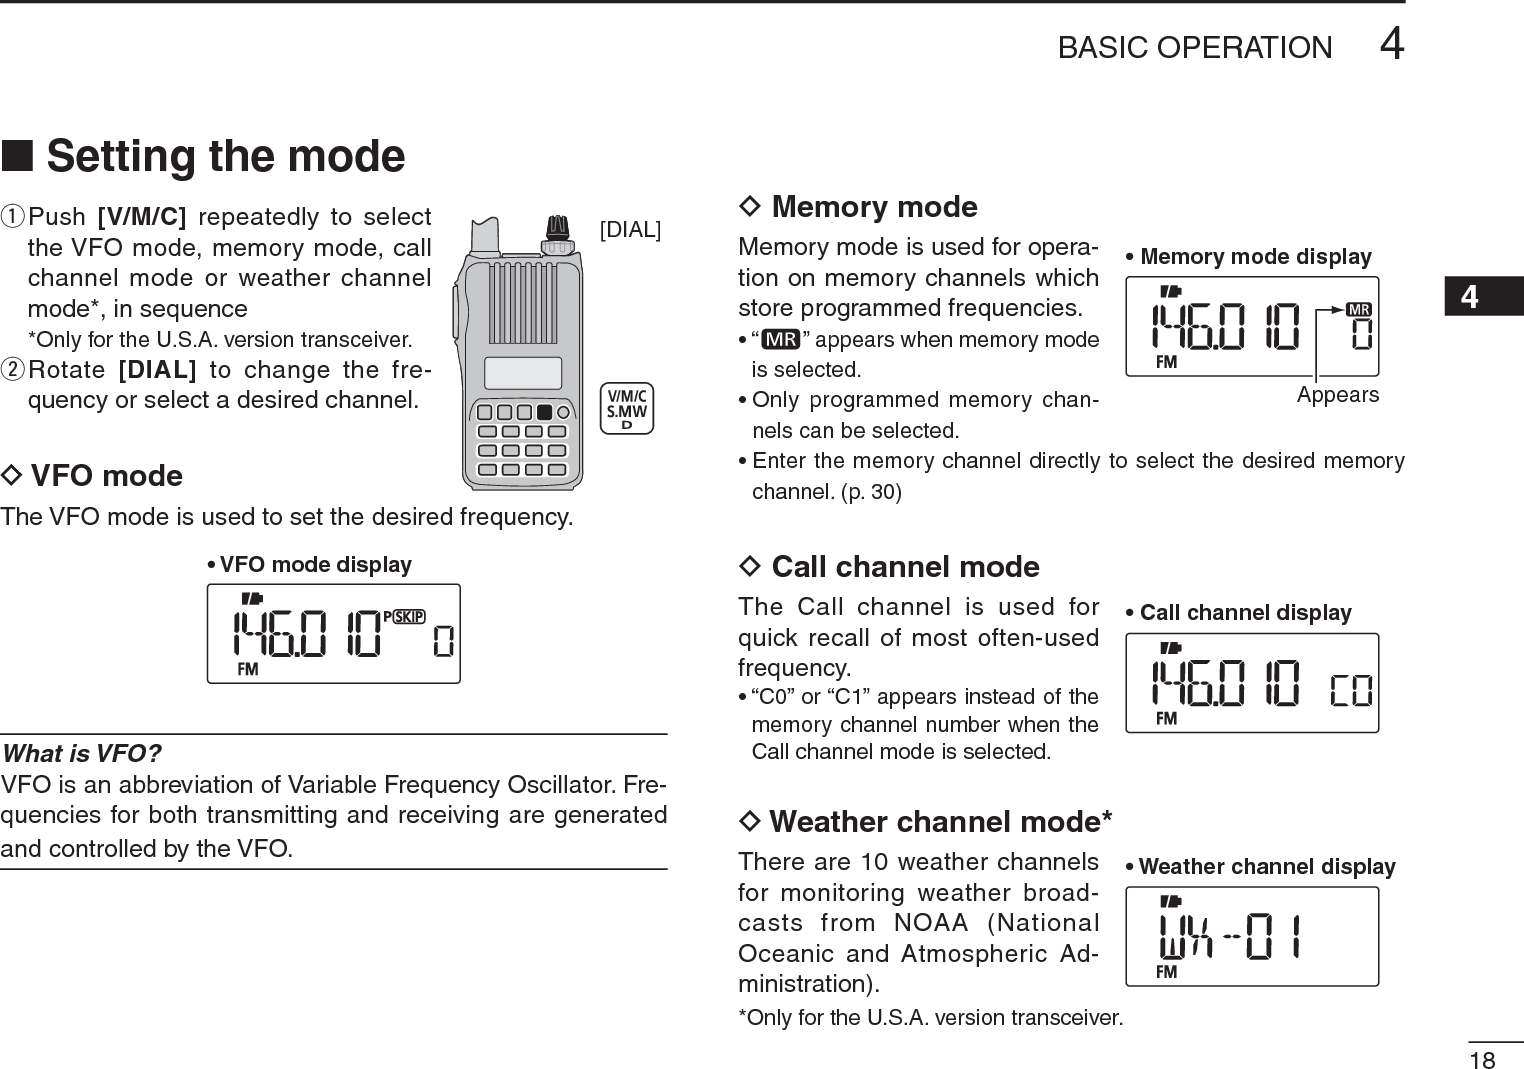 184BASIC OPERATION12345678910111213141516171819N Setting the modeq  Push  [V/M/C] repeatedly to select the VFO mode, memory mode, call channel mode or weather channel mode*, in sequence*Only for the U.S.A. version transceiver.w  Rotate  [DIAL] to change the fre-quency or select a desired channel.D VFO modeThe VFO mode is used to set the desired frequency.• VFO mode displayWhat is VFO?VFO is an abbreviation of Variable Frequency Oscillator. Fre-quencies for both transmitting and receiving are generated and controlled by the VFO.D Memory modeMemory mode is used for opera-tion on memory channels which store programmed frequencies.•“ ” appears when memory mode is selected.• Only programmed memory chan-nels can be selected.• Enter the memory channel directly to select the desired memory channel. (p. 30)D Call channel modeThe Call channel is used for quick recall of most often-used frequency.• “C0” or “C1” appears instead of the memory channel number when the Call channel mode is selected.D Weather channel mode*There are 10 weather channels for monitoring weather broad-casts from NOAA (National Oceanic and Atmospheric Ad-ministration).*Only for the U.S.A. version transceiver.[DIAL]• Memory mode displayAppears• Call channel display• Weather channel display